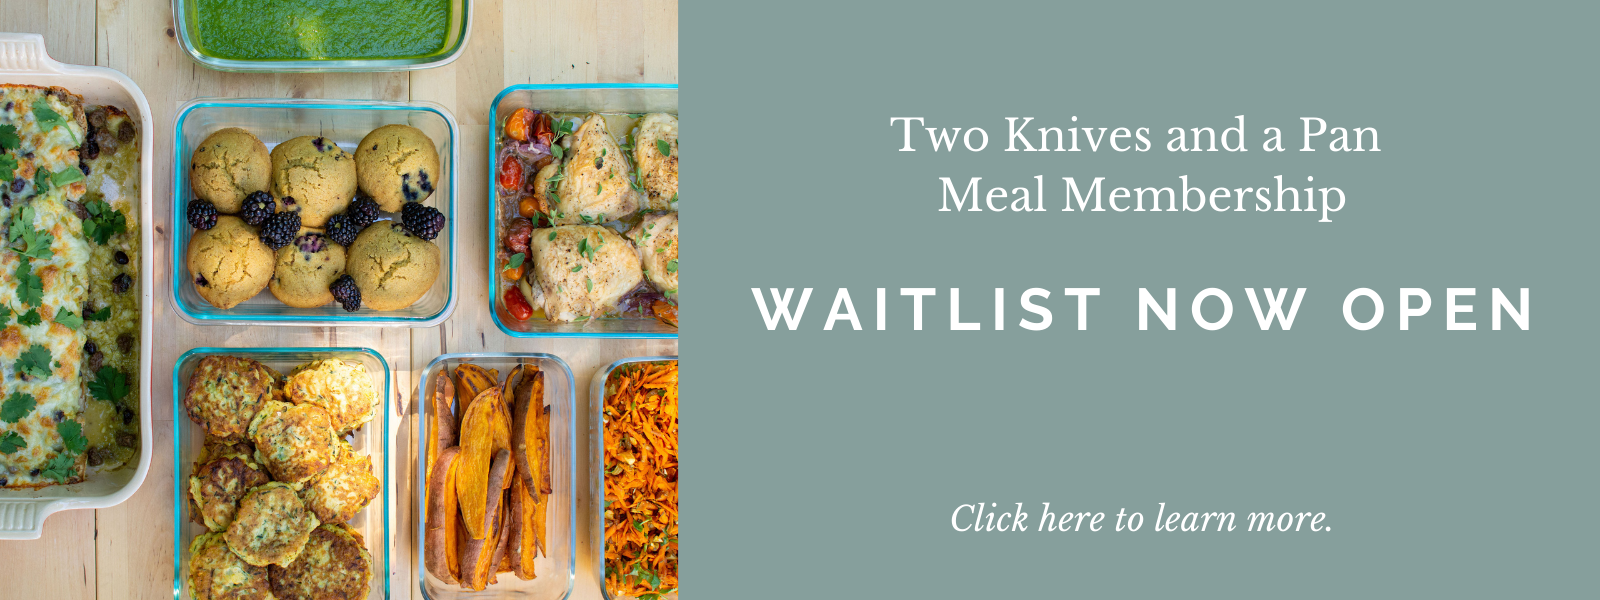 Two Knives and a Pan Meal Membership Waitlist Now Open. Click here to learn more.